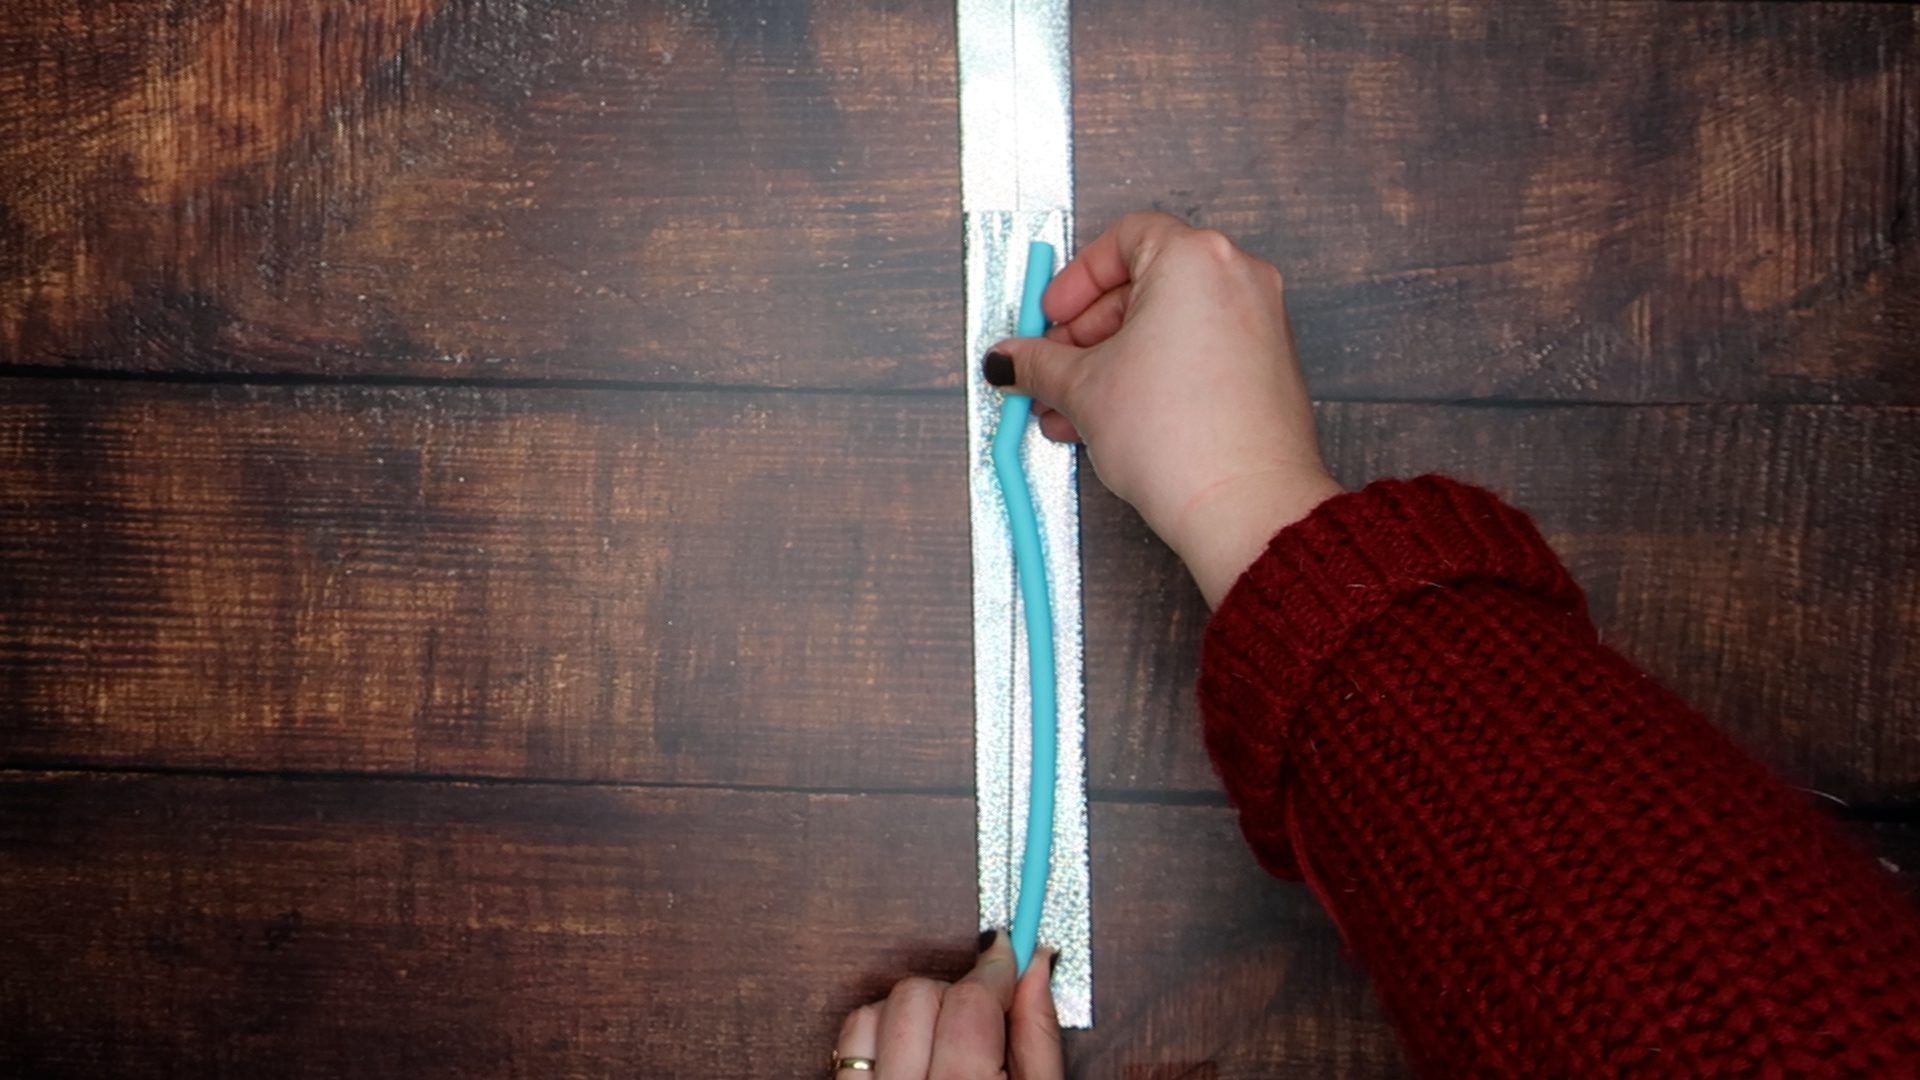 Step 5a: Measure your reusable straw